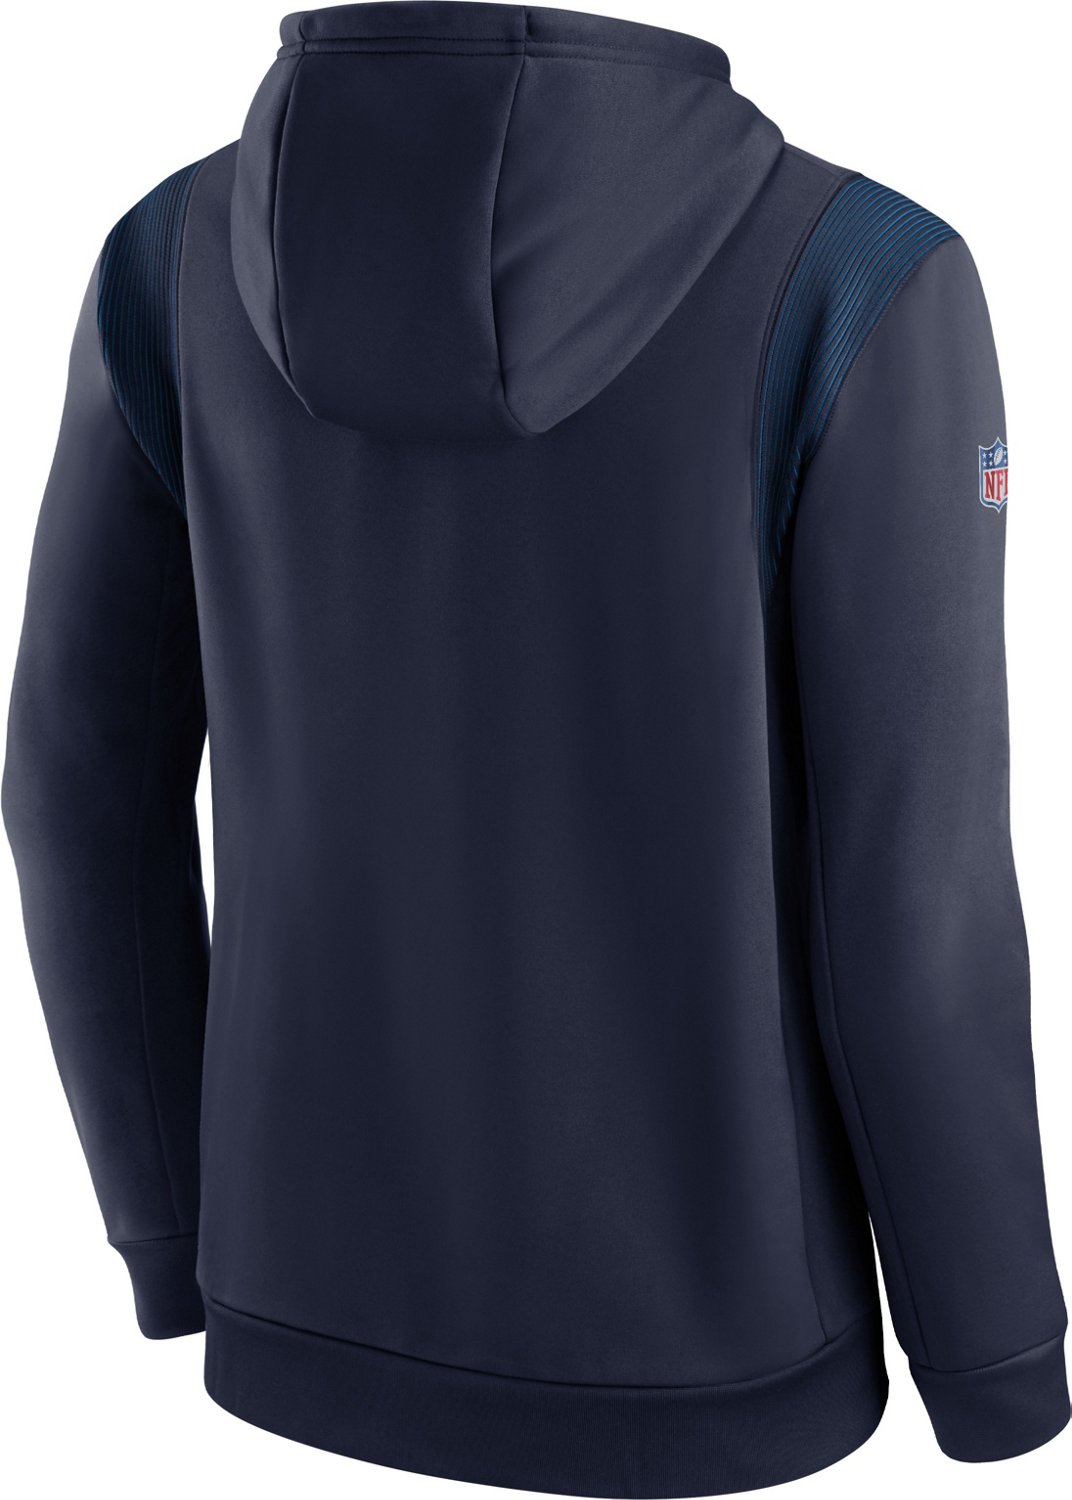 Nike Men's Tennessee Titans Therma Hoodie | Academy